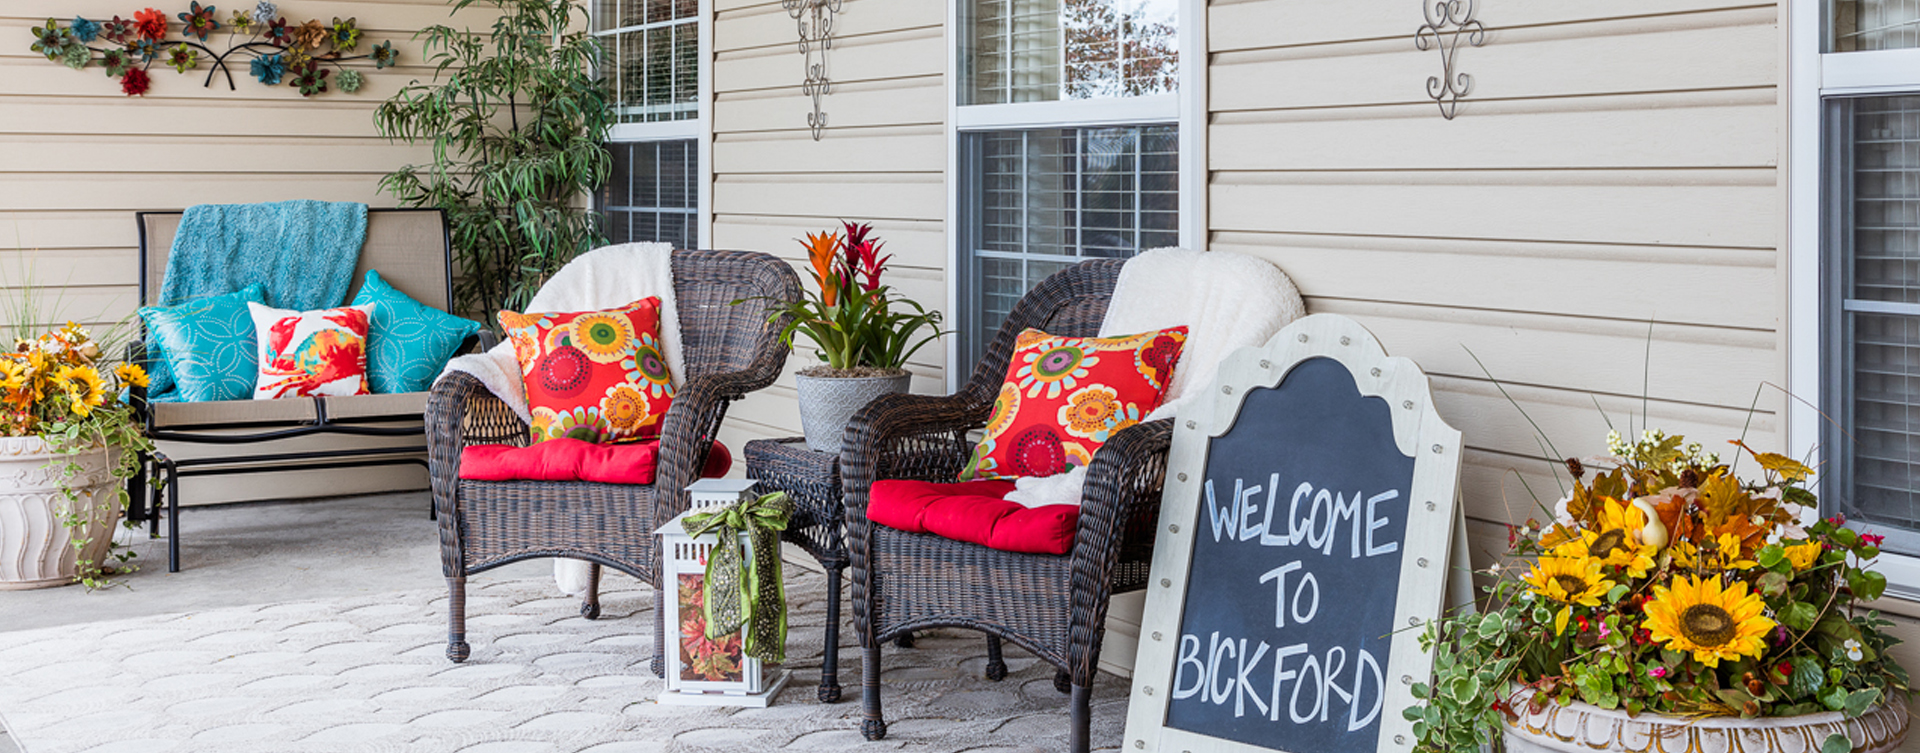 Enjoy conversations with friends on the porch at Bickford of Lincoln